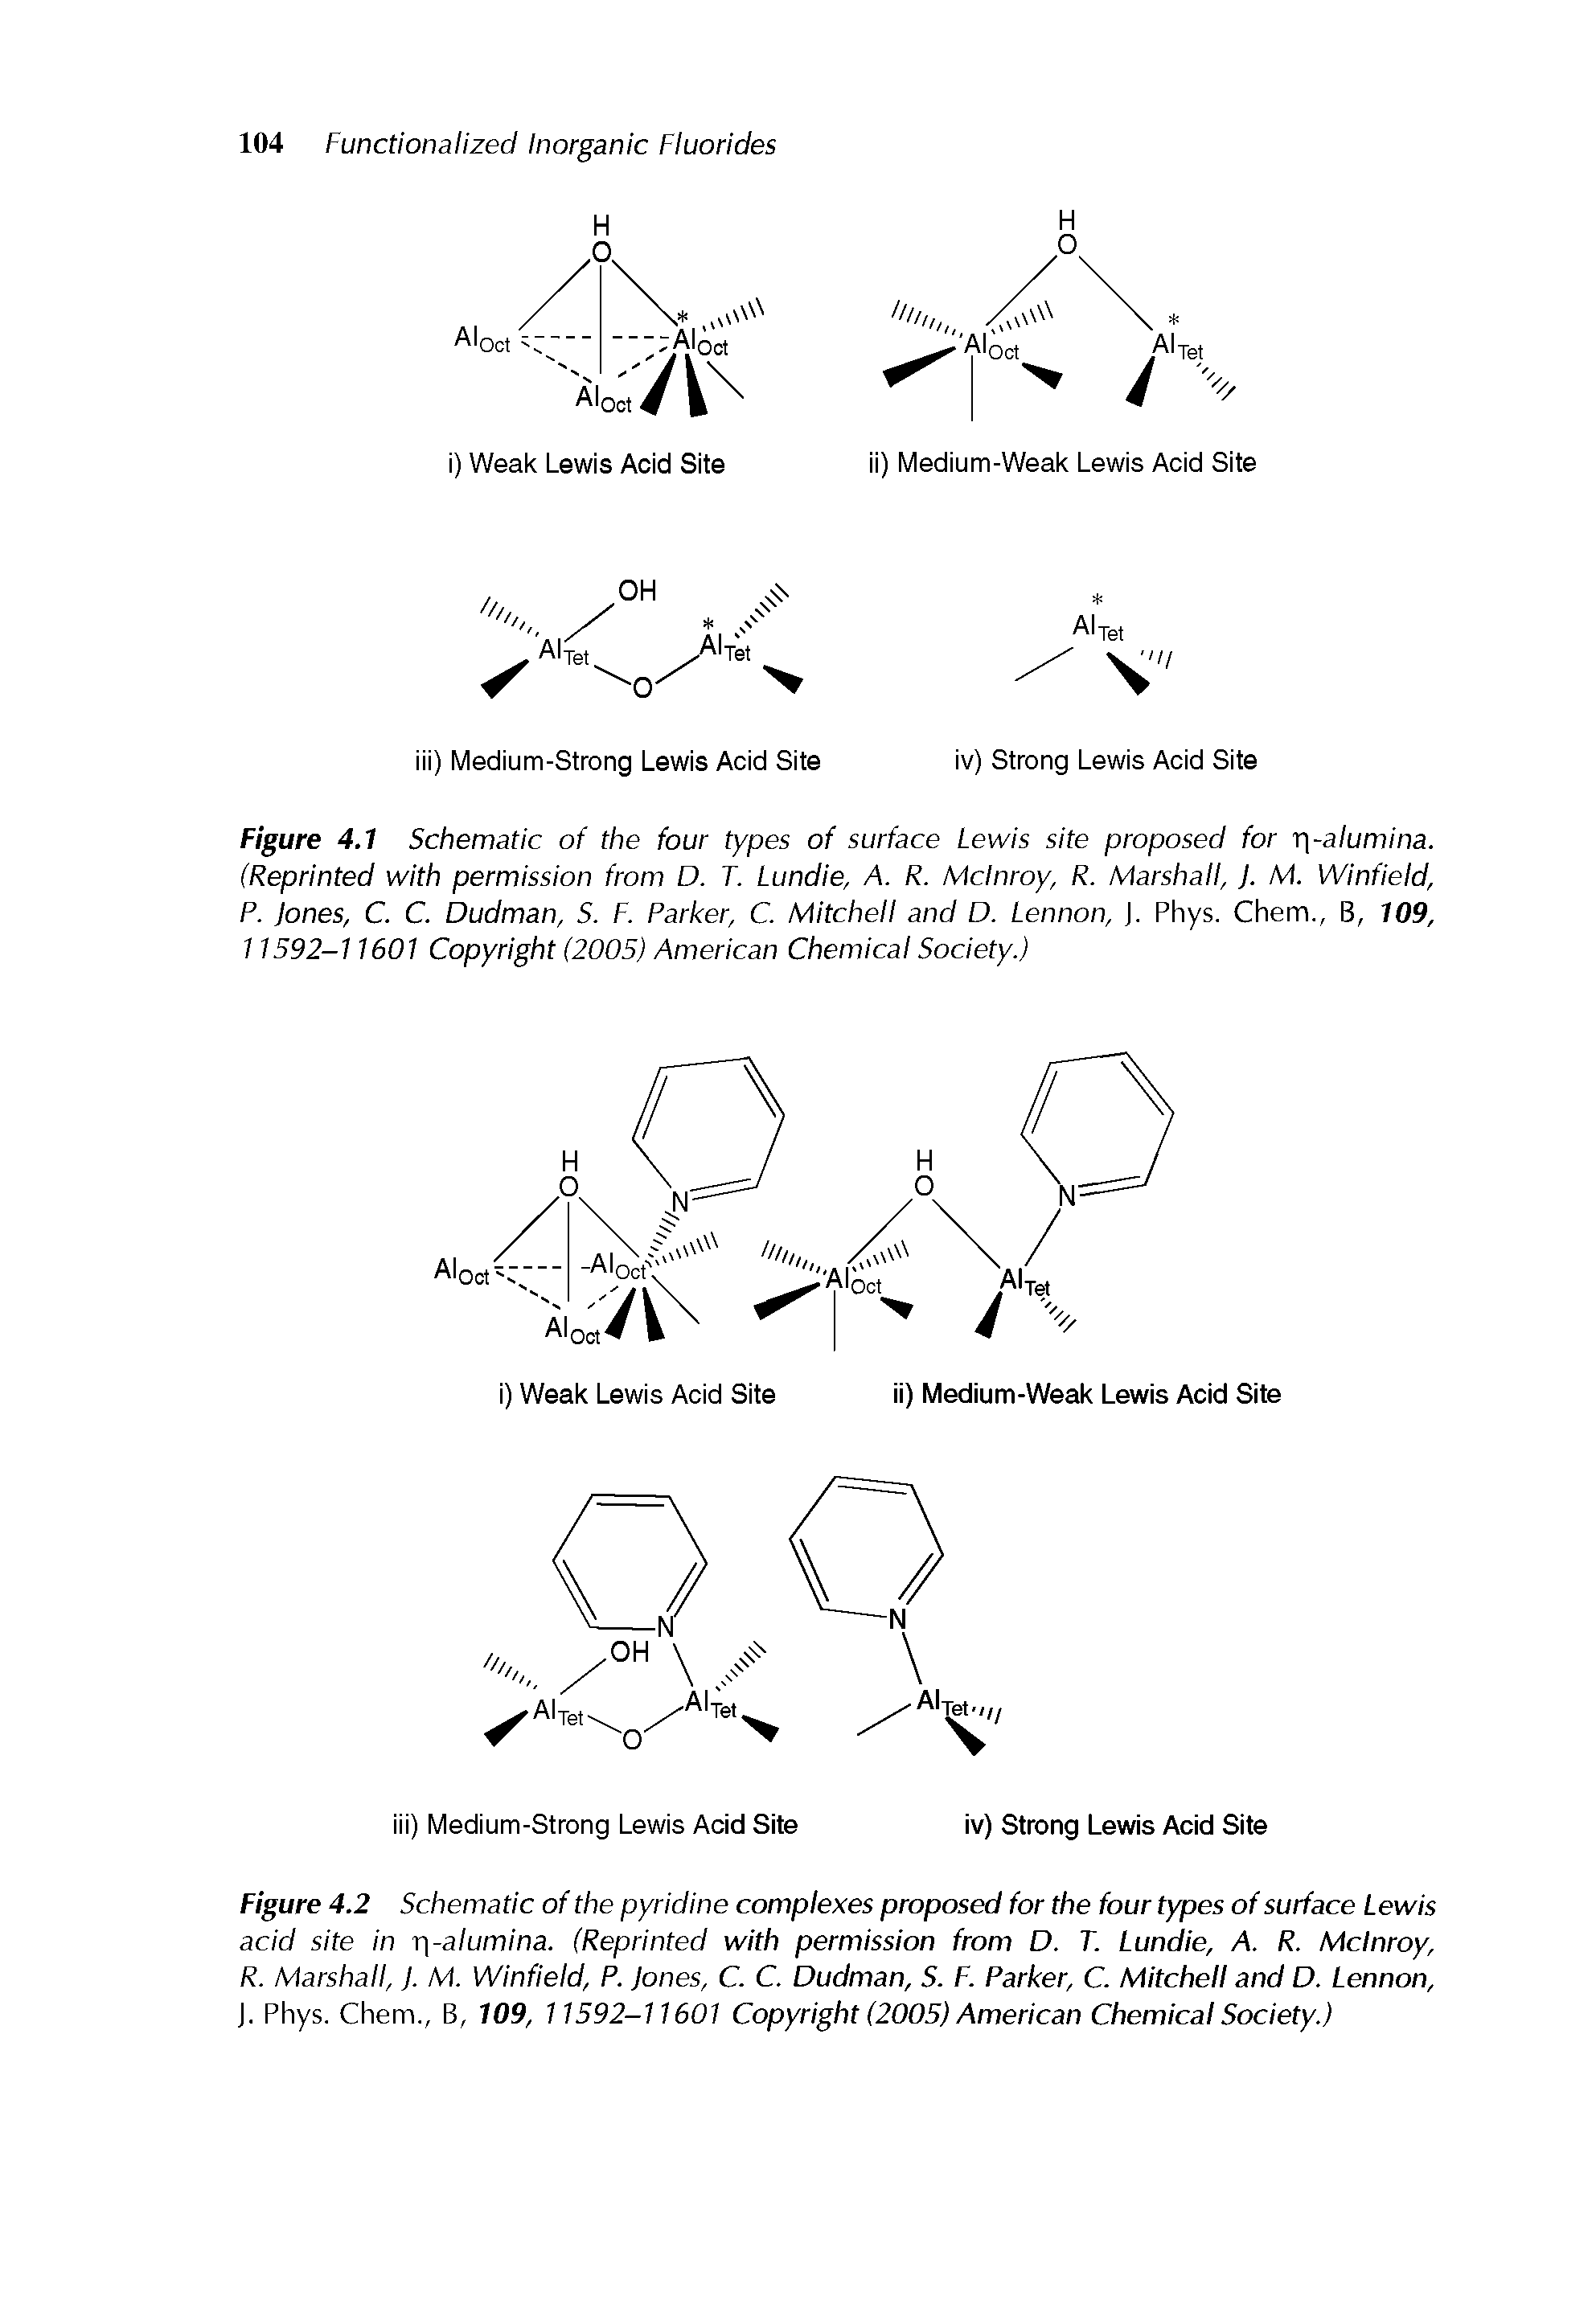 Figure 4.2 Schematic of the pyridine complexes proposed for the four types of surface Lewis acid site in r -alumina. (Reprinted with permission from D. T. Lundie, A. R. Mclnroy, R. Marshall, J. M. Winfield, P. Jones, C. C. Dudman, S. F. Parker, C. Mitchell and D. Lennon, J. Phys. Chem., B, 109, 11592-11601 Copyright (2005) American Chemical Society.)...